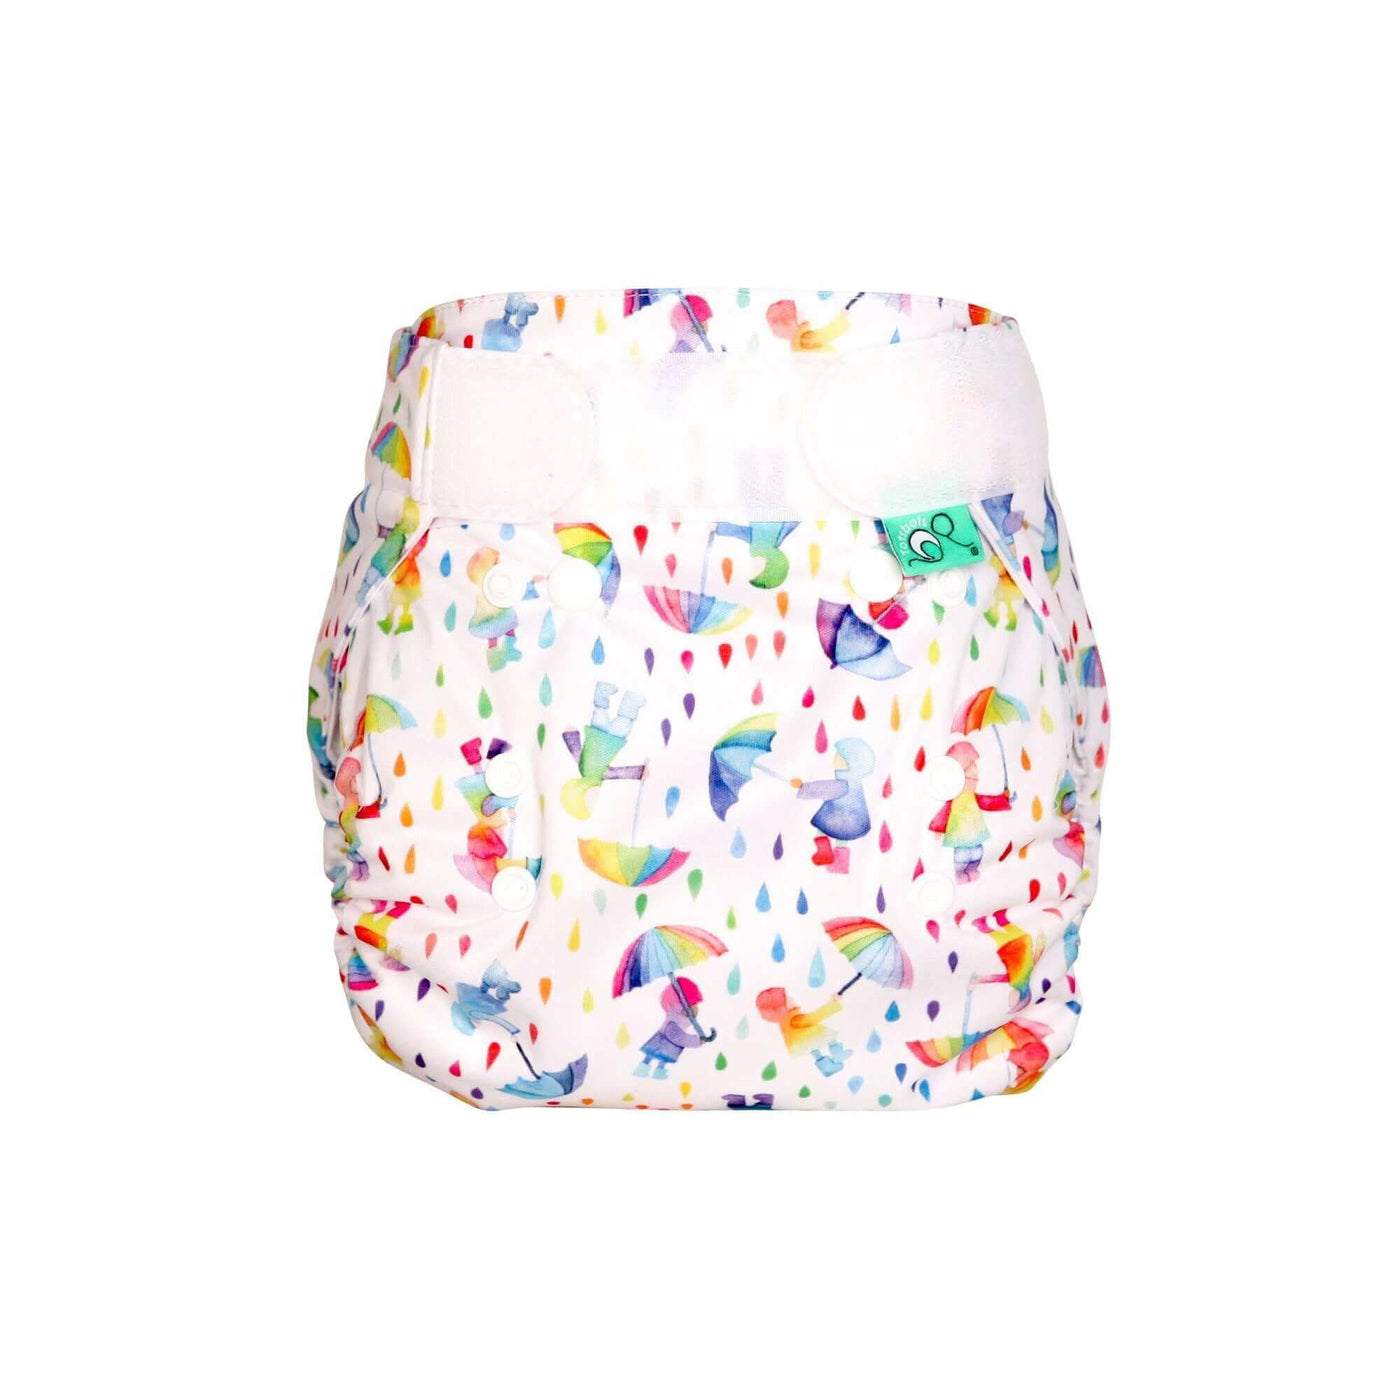 Tots Bots Bamboozle Nappy Wrap Colour: Dilly Dally Size: Size 1 (6-18lbs) reusable nappies Earthlets